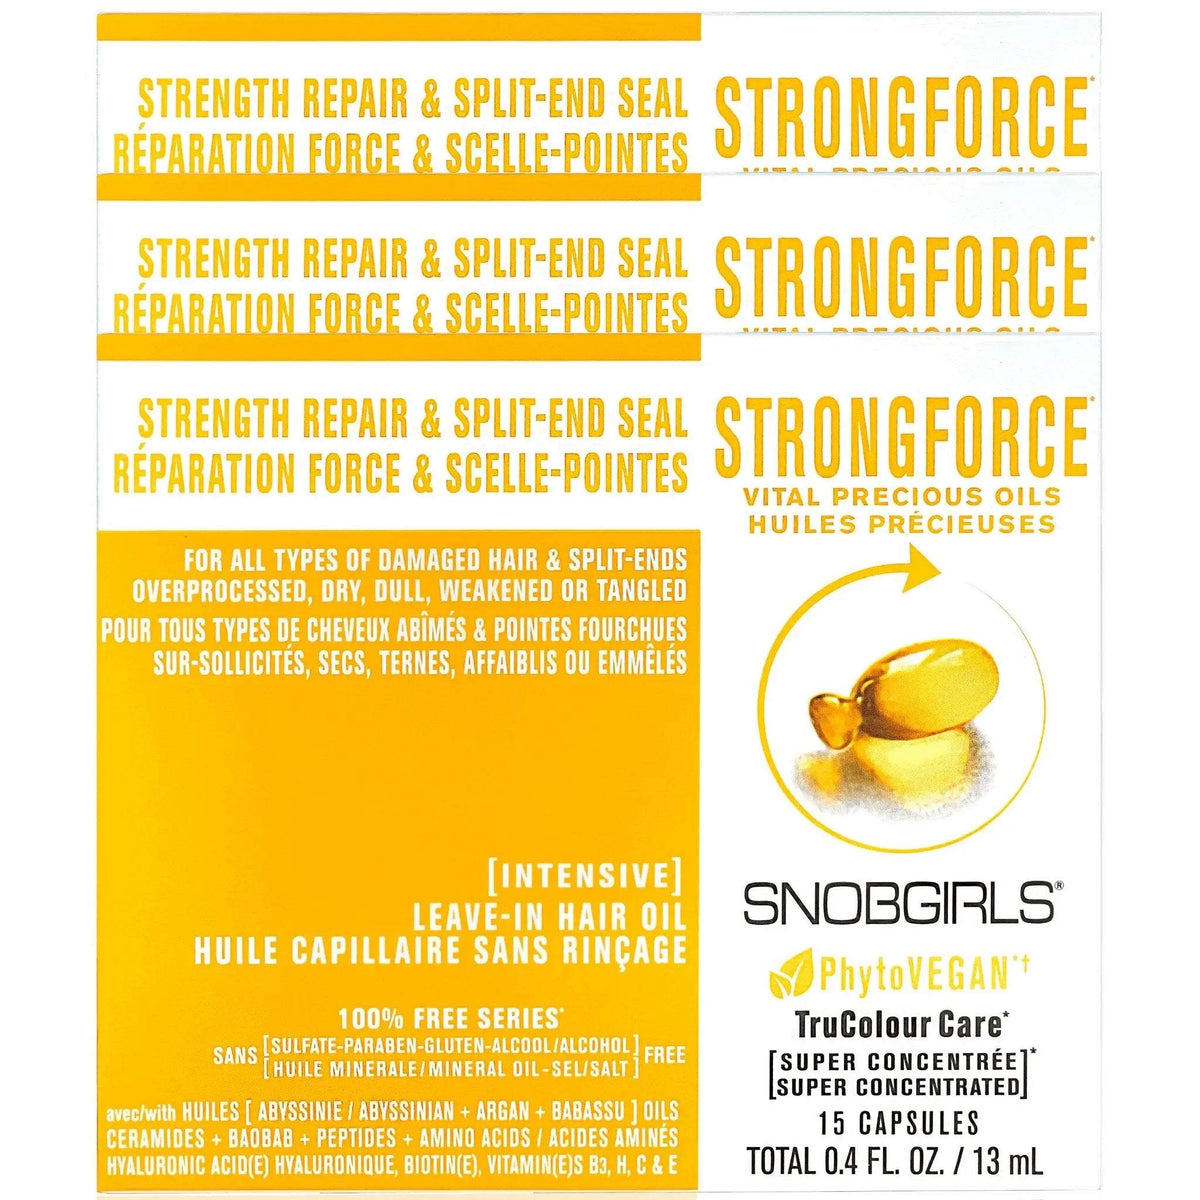 STRONGFORCE VITAL PRECIOUS OILS - 45 CAPSULES PhytoVEGAN Super Concentrated Intensive Leave-In Hair Oil - SNOBGIRLS.com